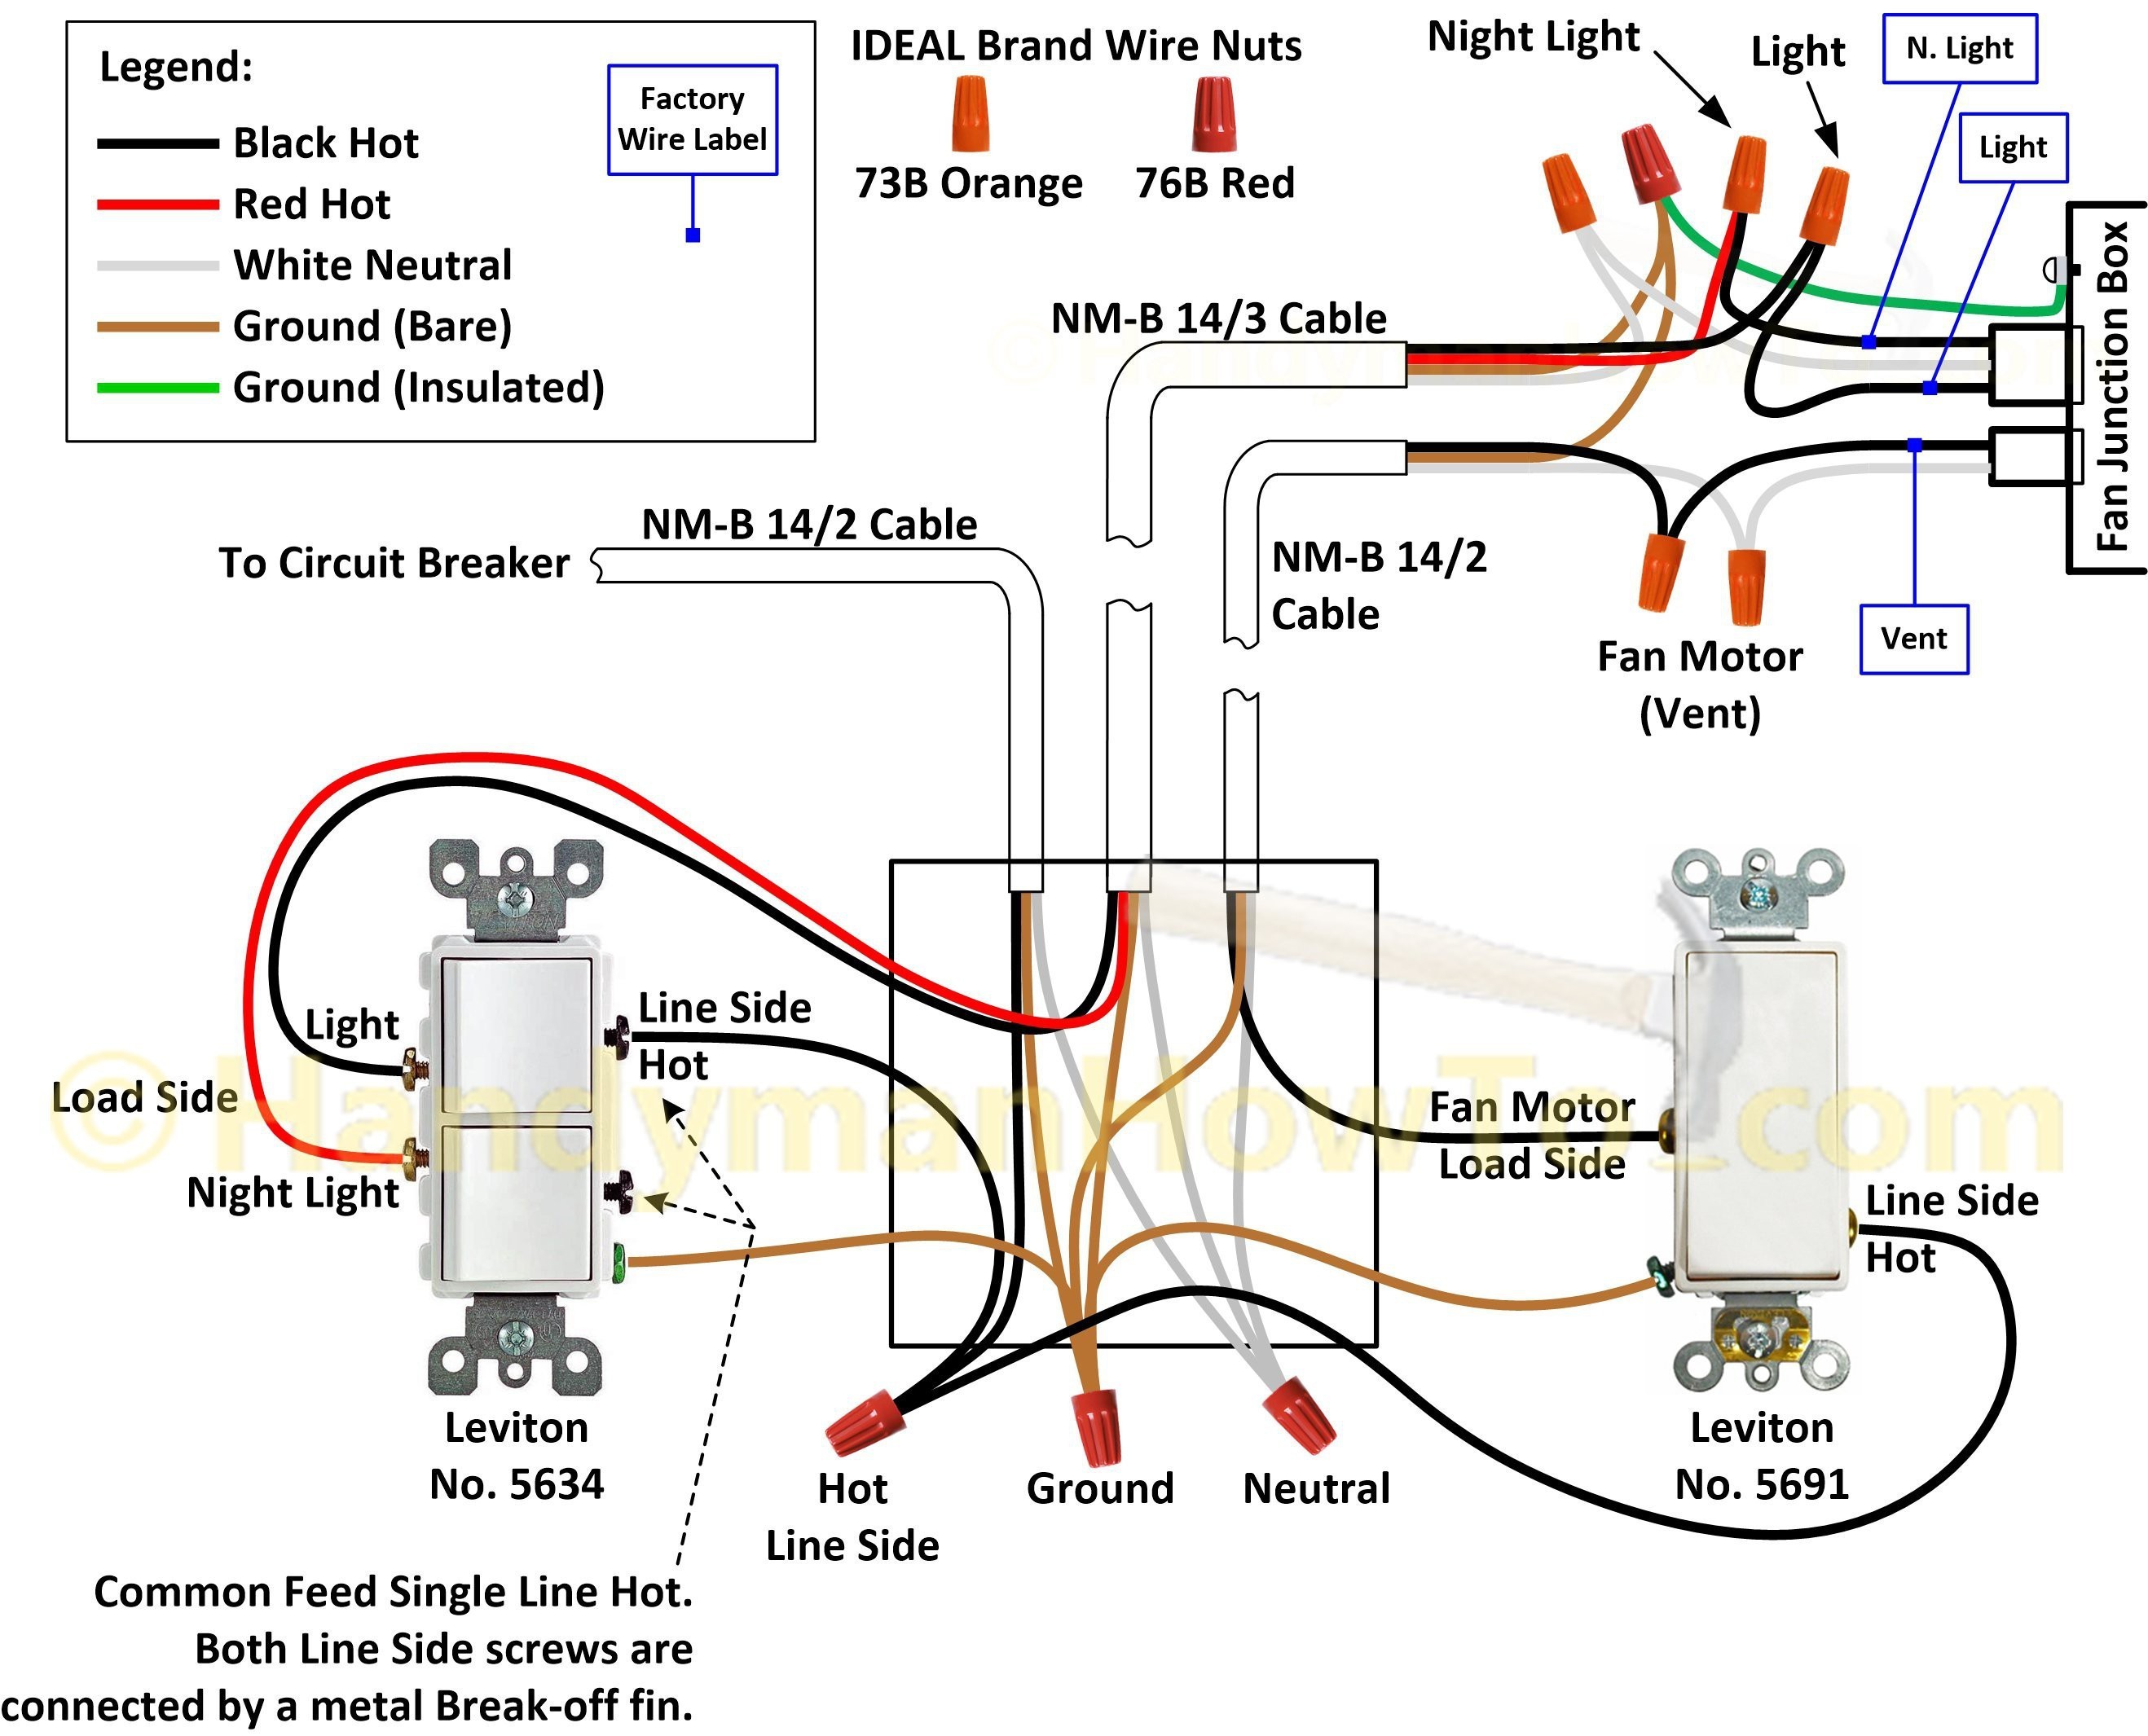 Wiring Diagrams for A Gfci bo Switch Refrence Wiring Diagram for Light Switch to Outlet Refrence